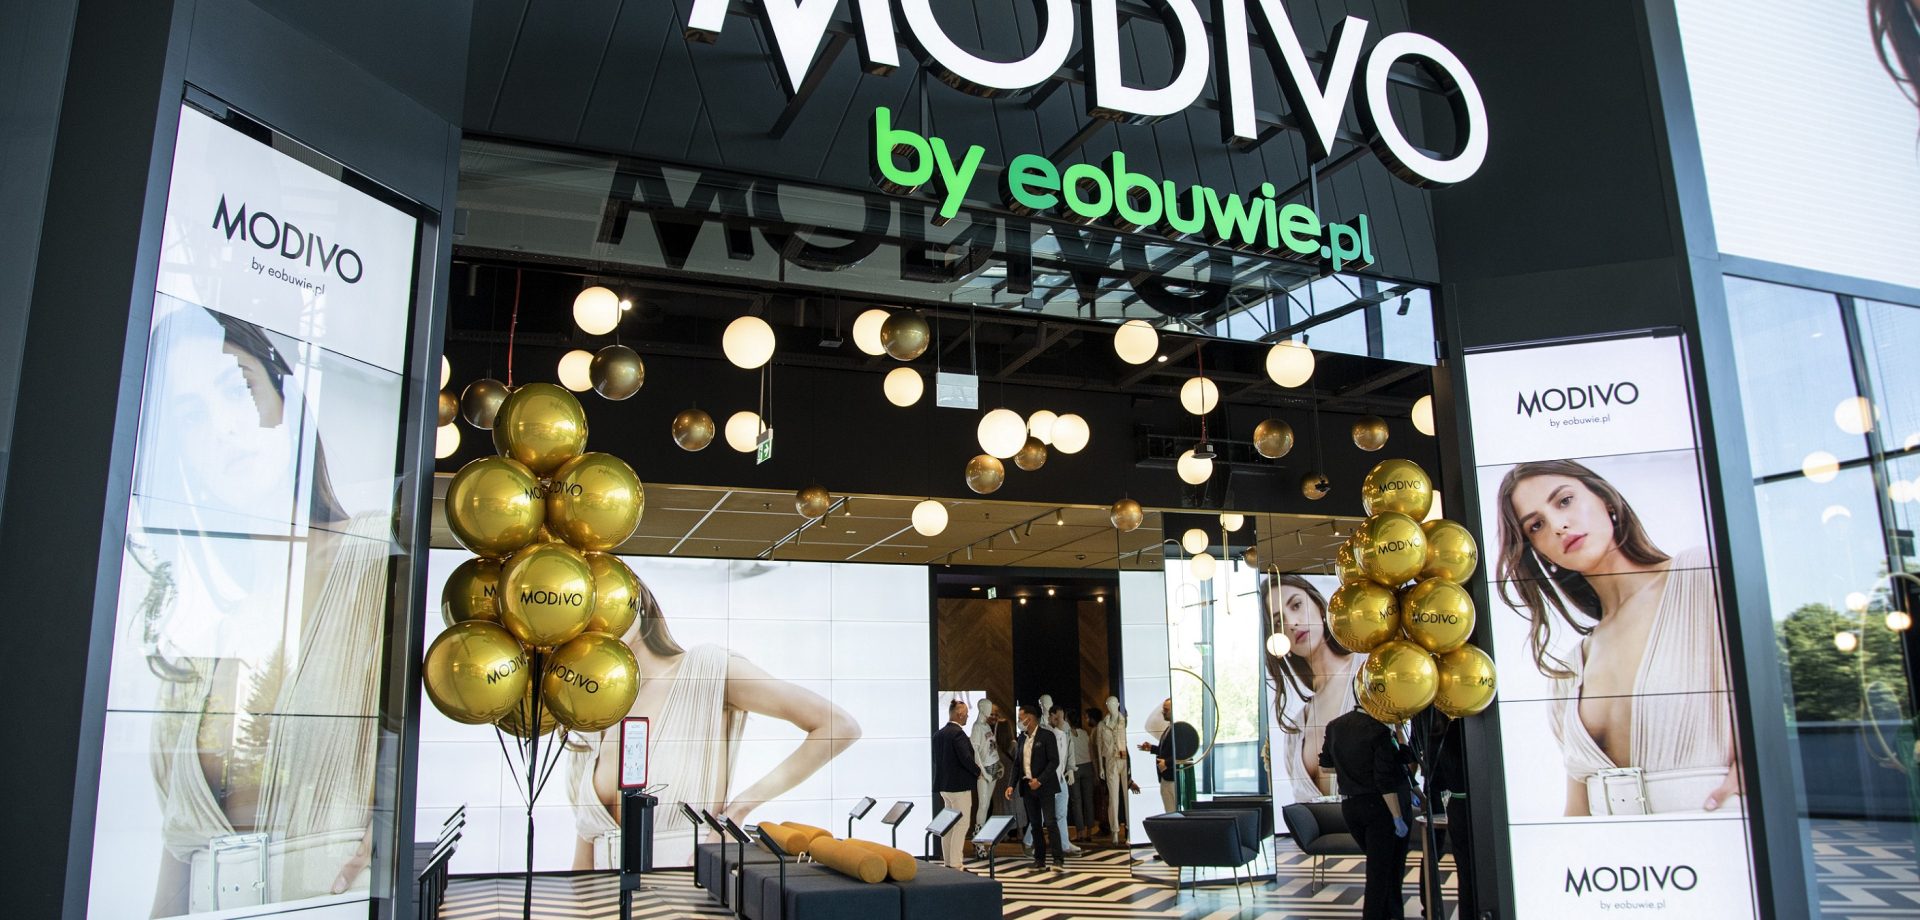 MODIVO: THE FIRST STATIONARY STORE ALREADY OPENED